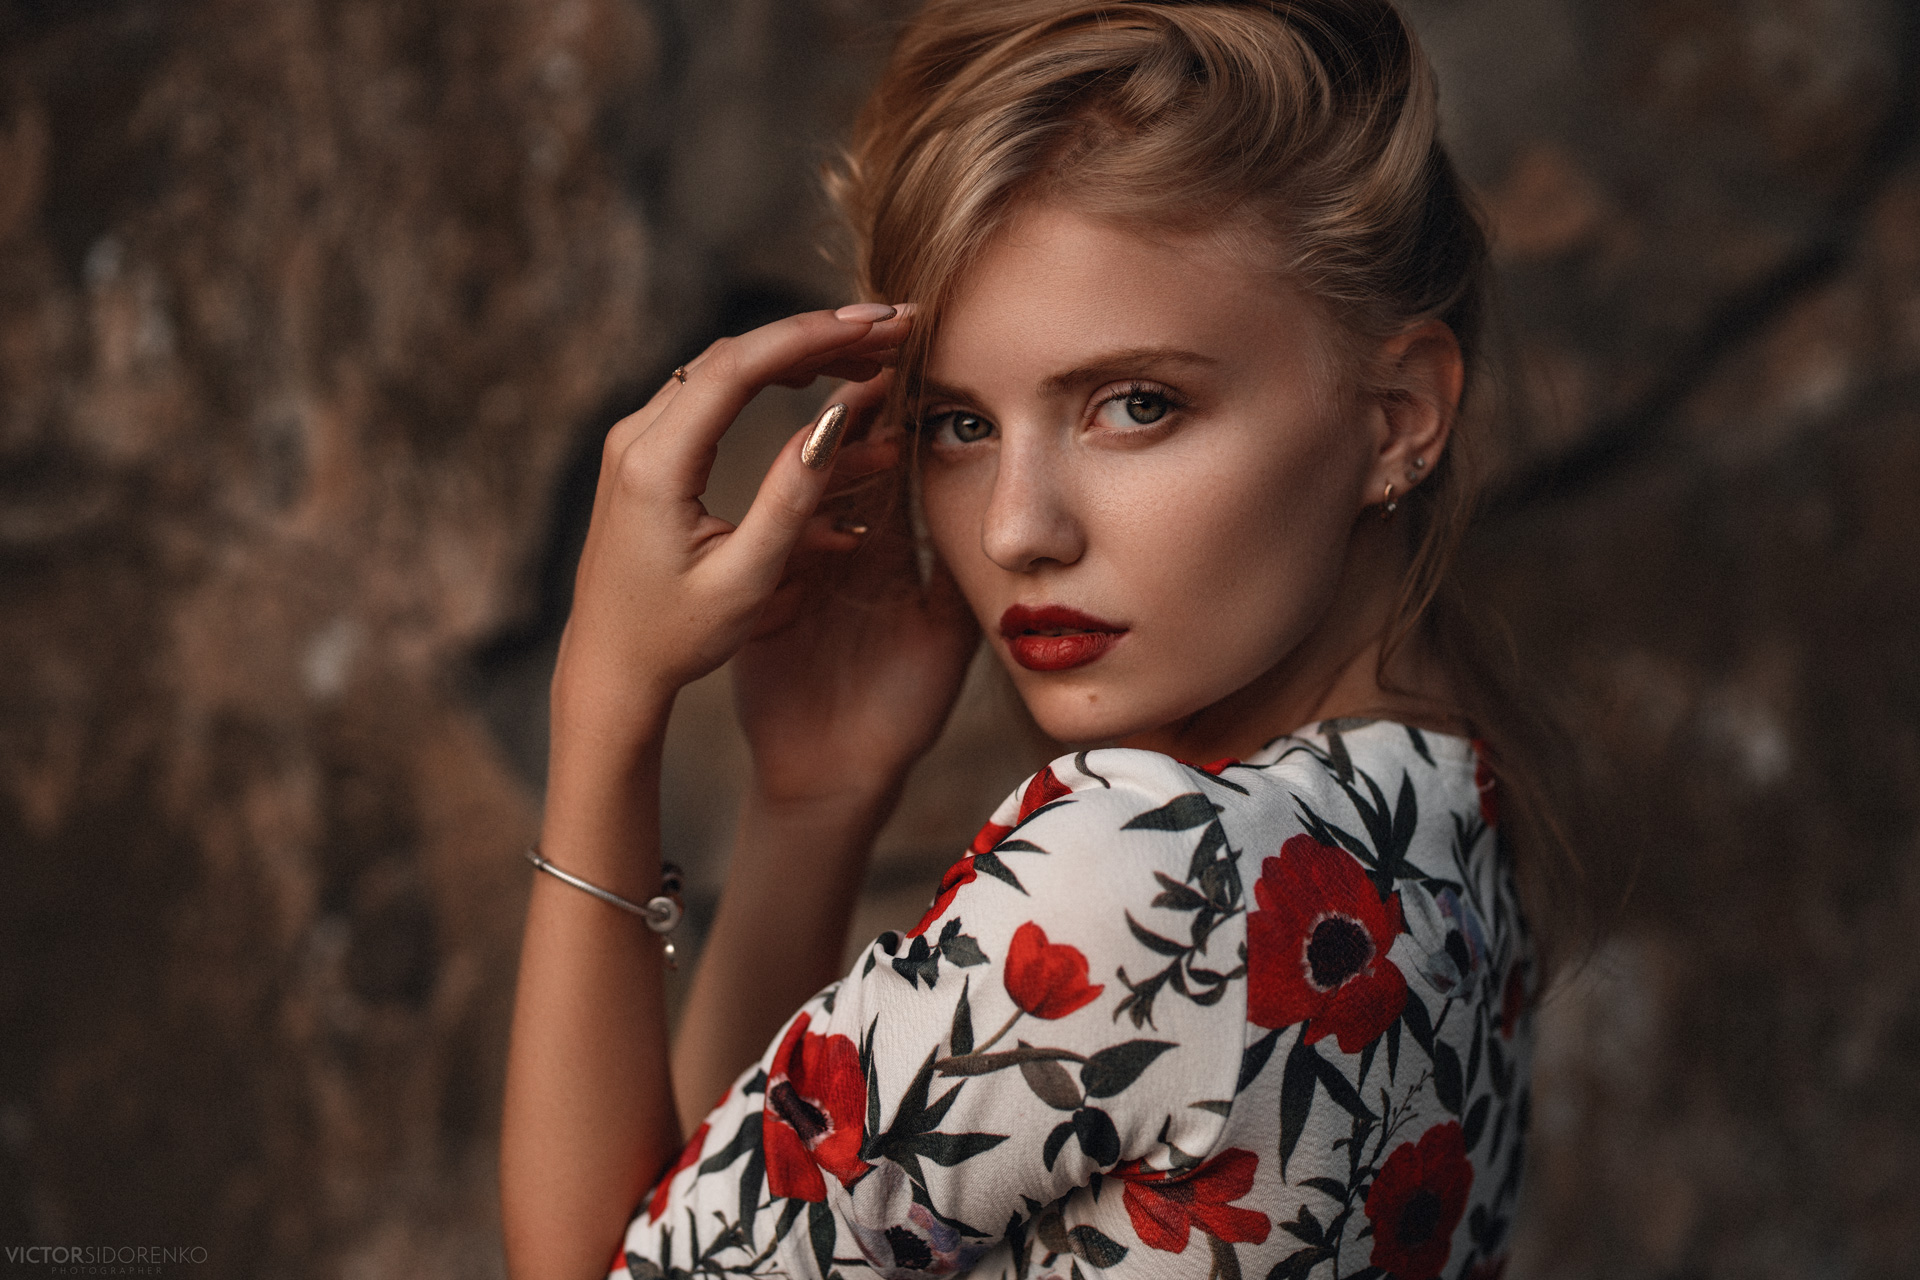 People 1920x1280 Katrin Enina Victor Sidorenko women model blonde touching hair looking at viewer red lipstick bracelets outdoors painted nails earring face women outdoors portrait photography closeup watermarked